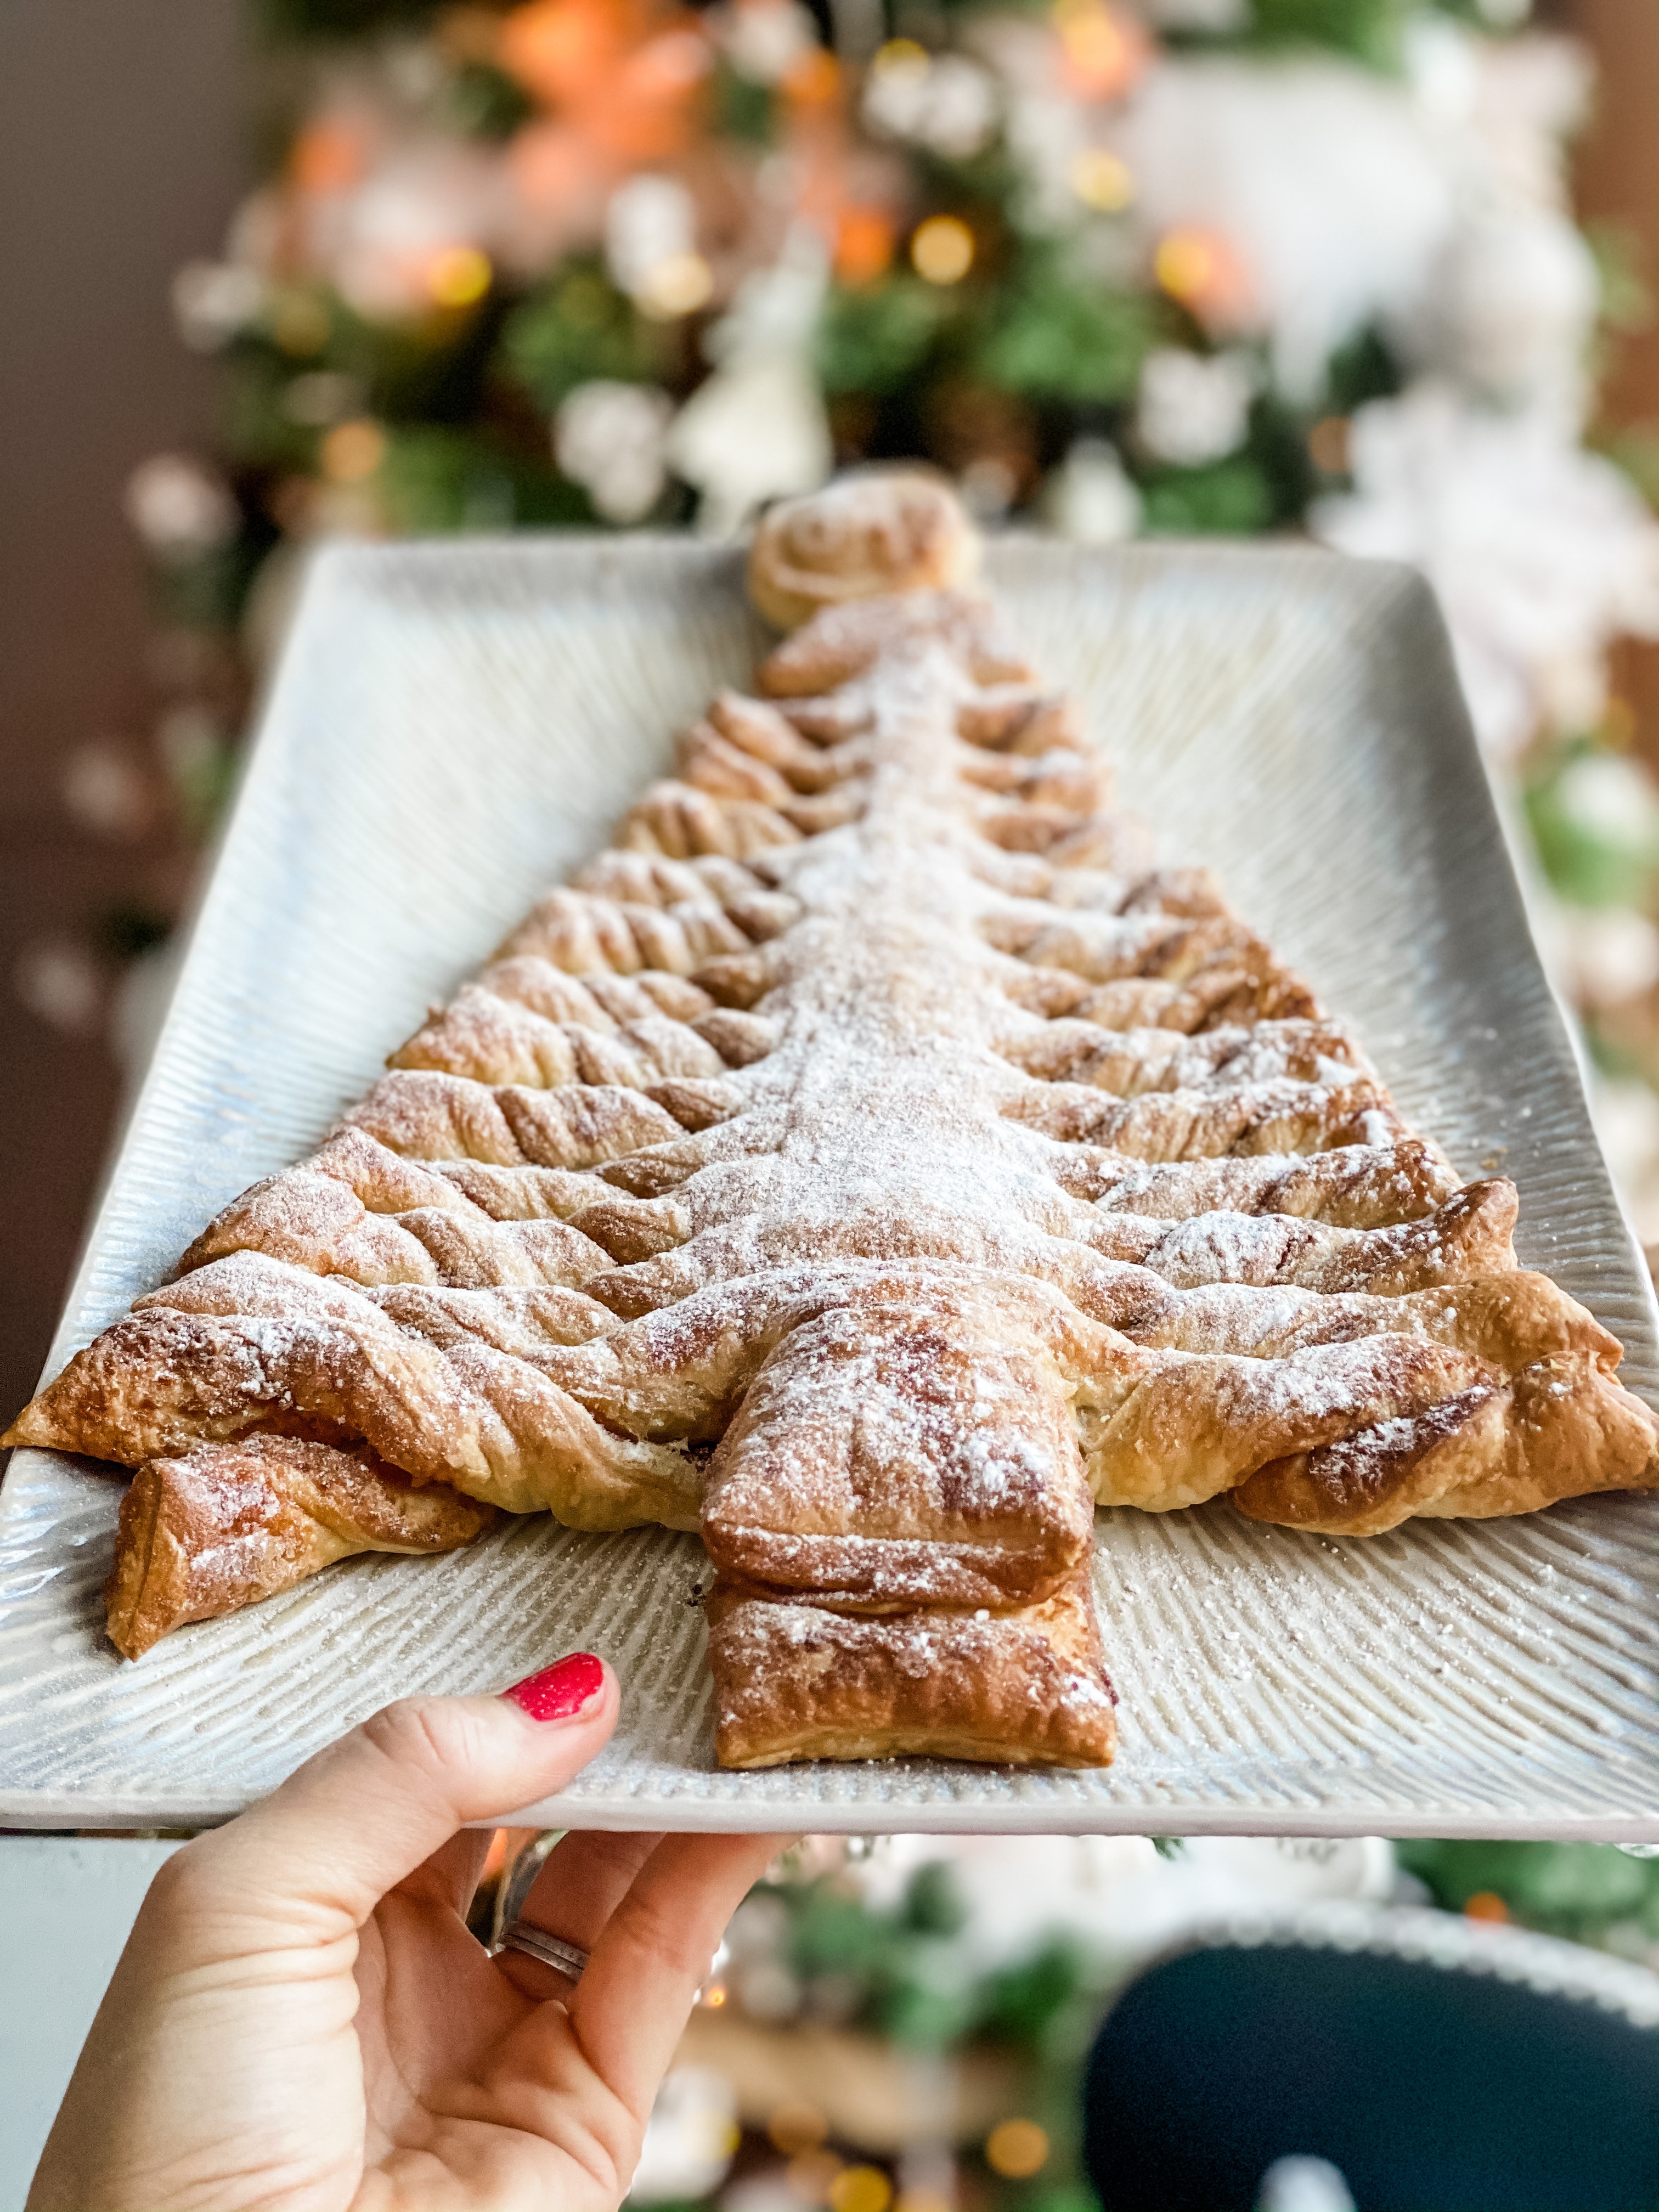 A puff pastry Christmas tree being held in front of a read Christmas tree